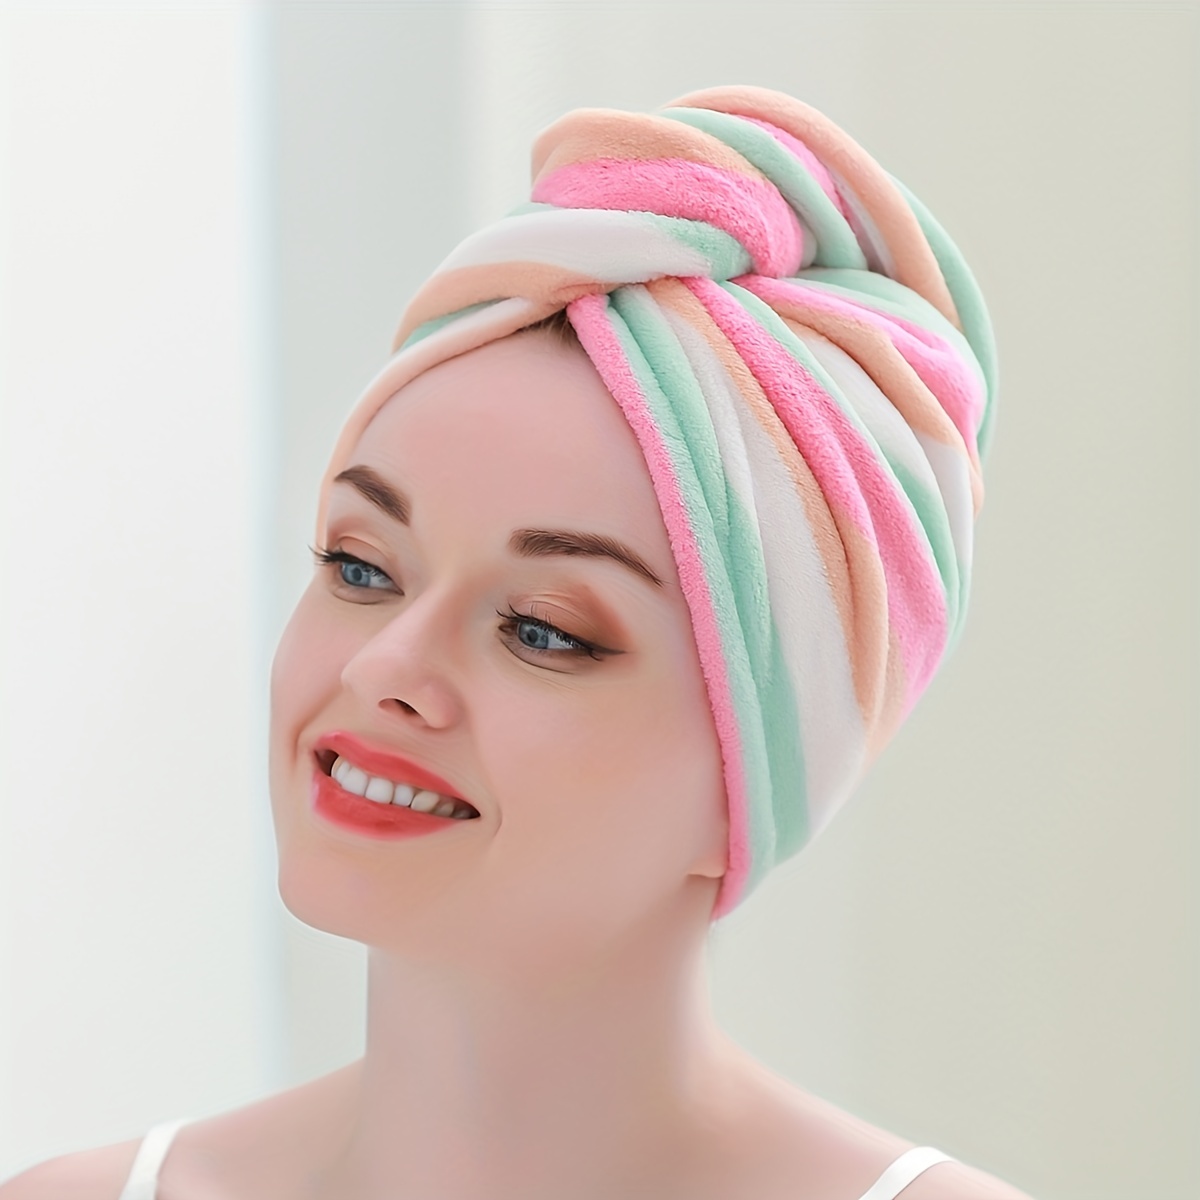 

1pc Rainbow Striped Hair Drying Cap, Soft Coral Velvet Hair Towel For Bathroom, Women's Absorbent Quick-drying Shower Cap, Bathroom Supplies